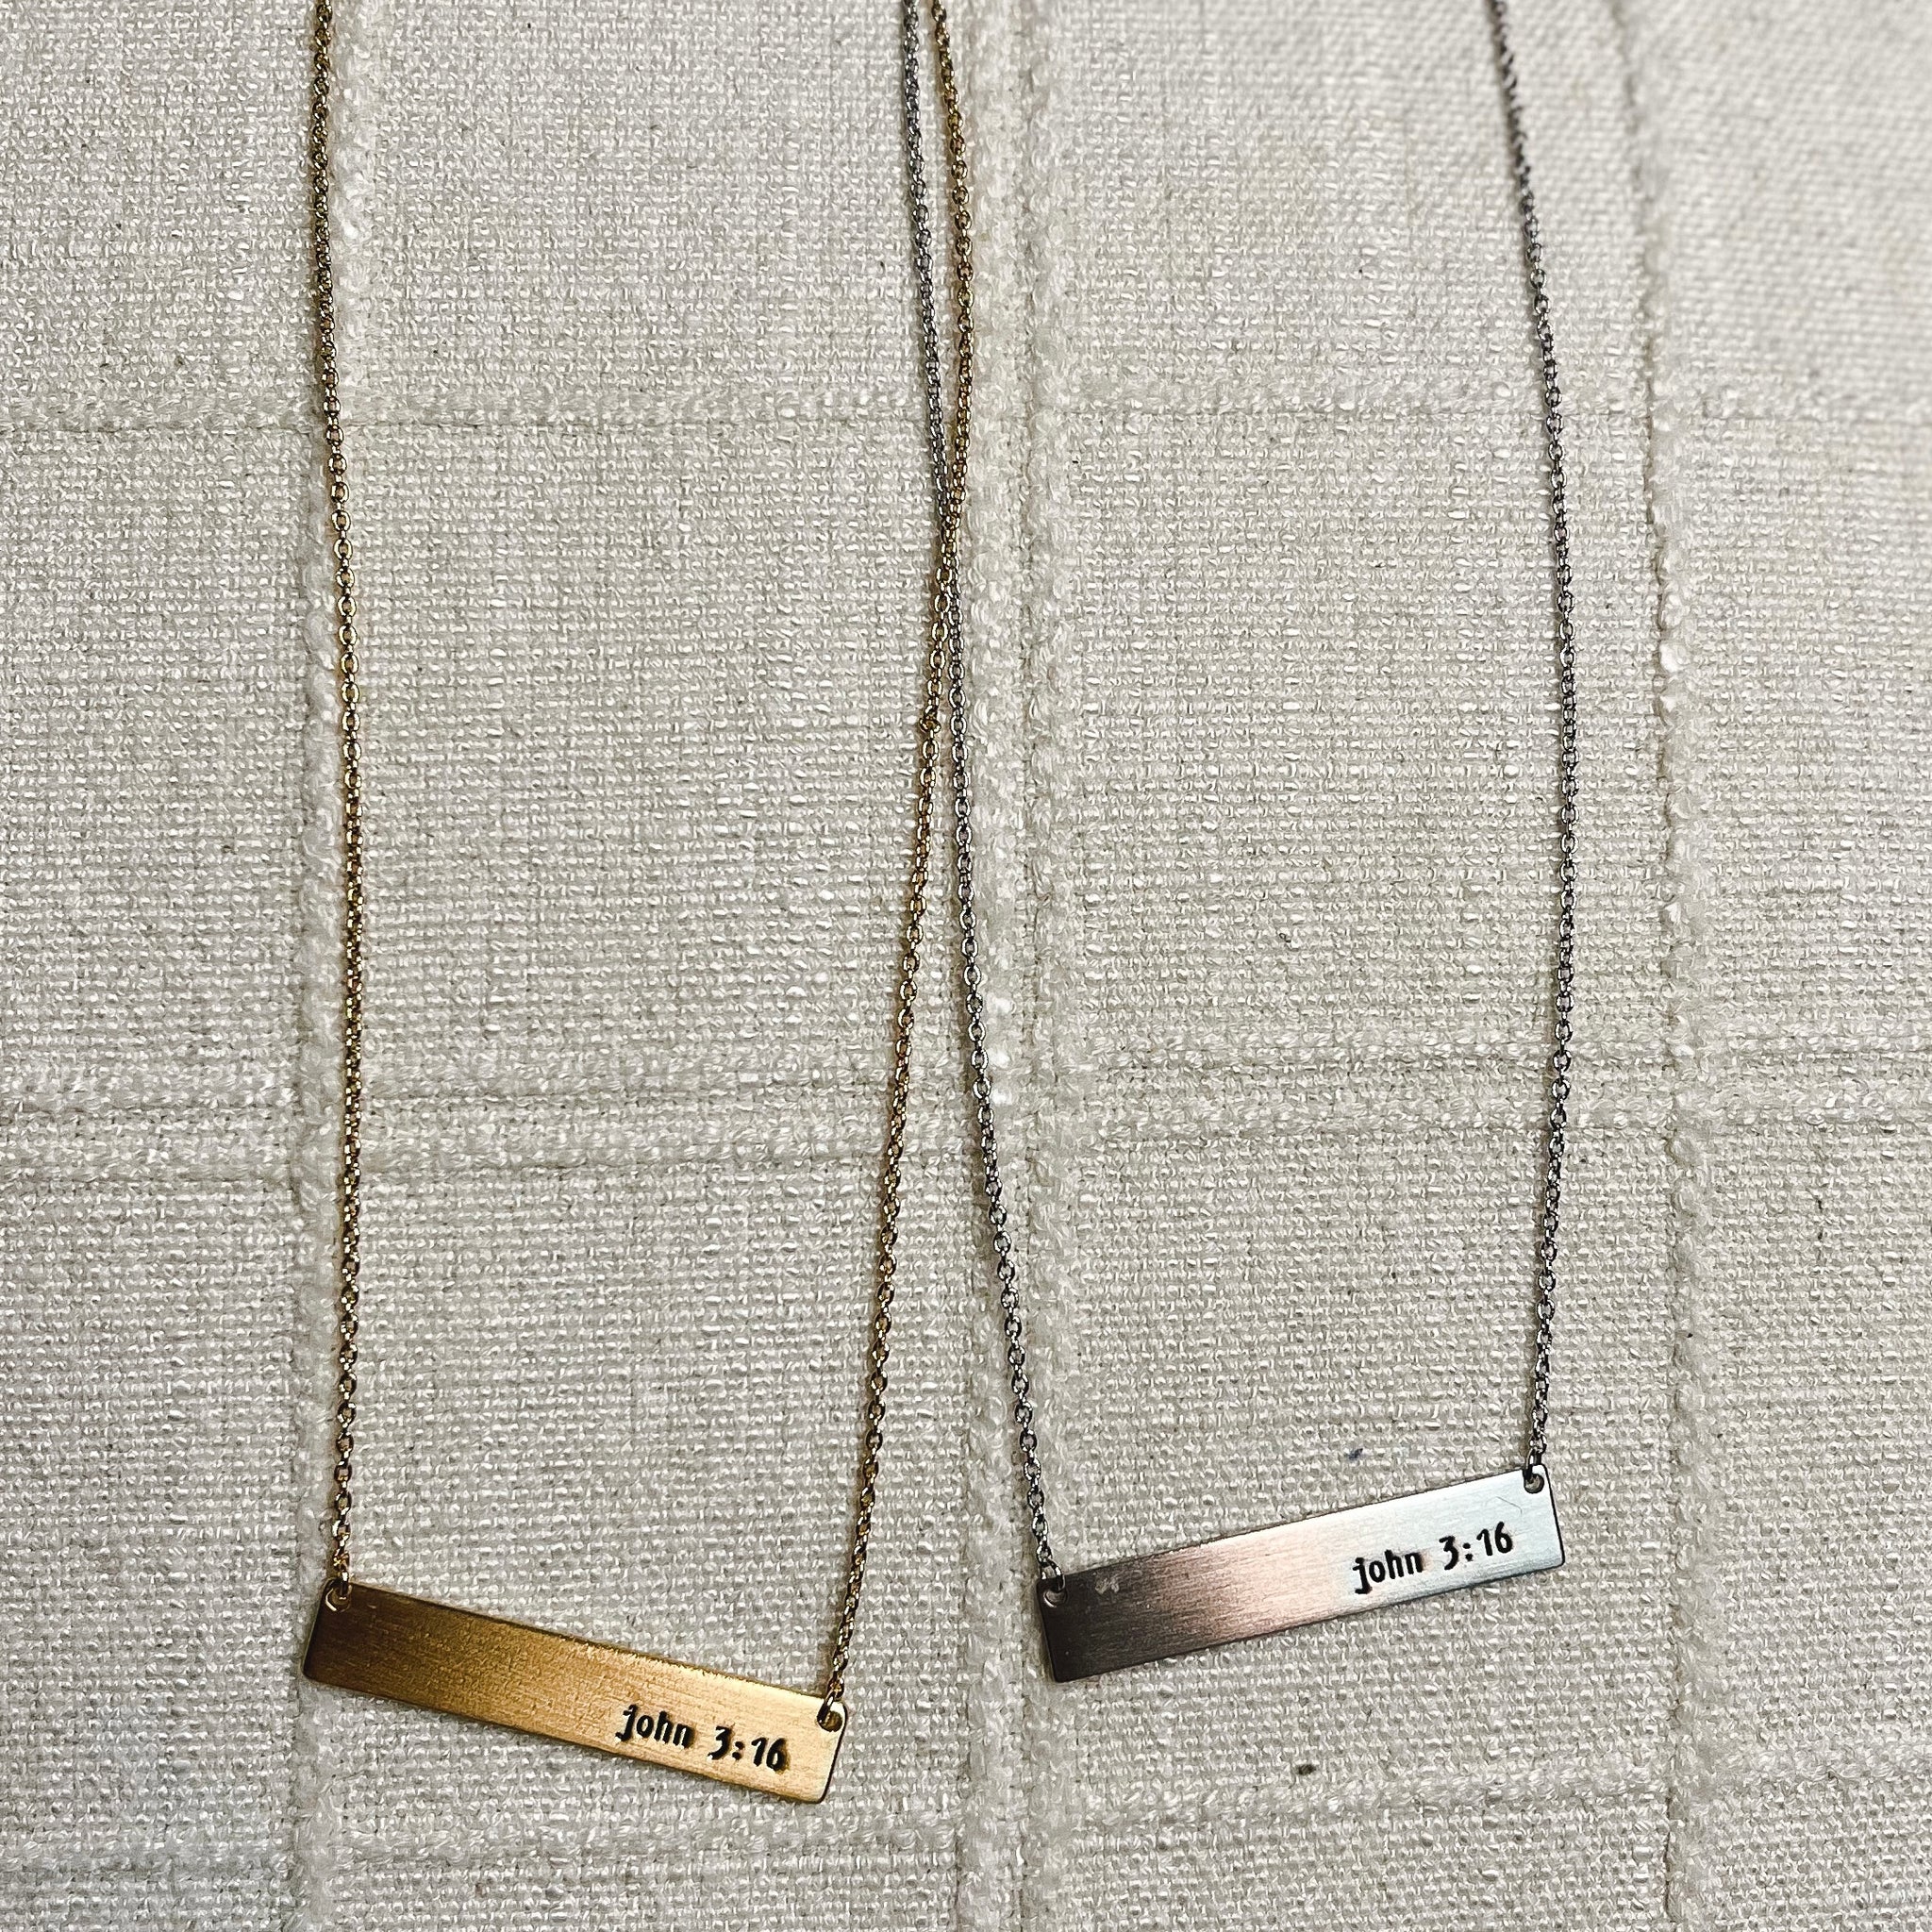 John 3:16 Bar Message Necklace. Inspirational message that comes in vintage, basic gold and silver colors.  Length: 16 in